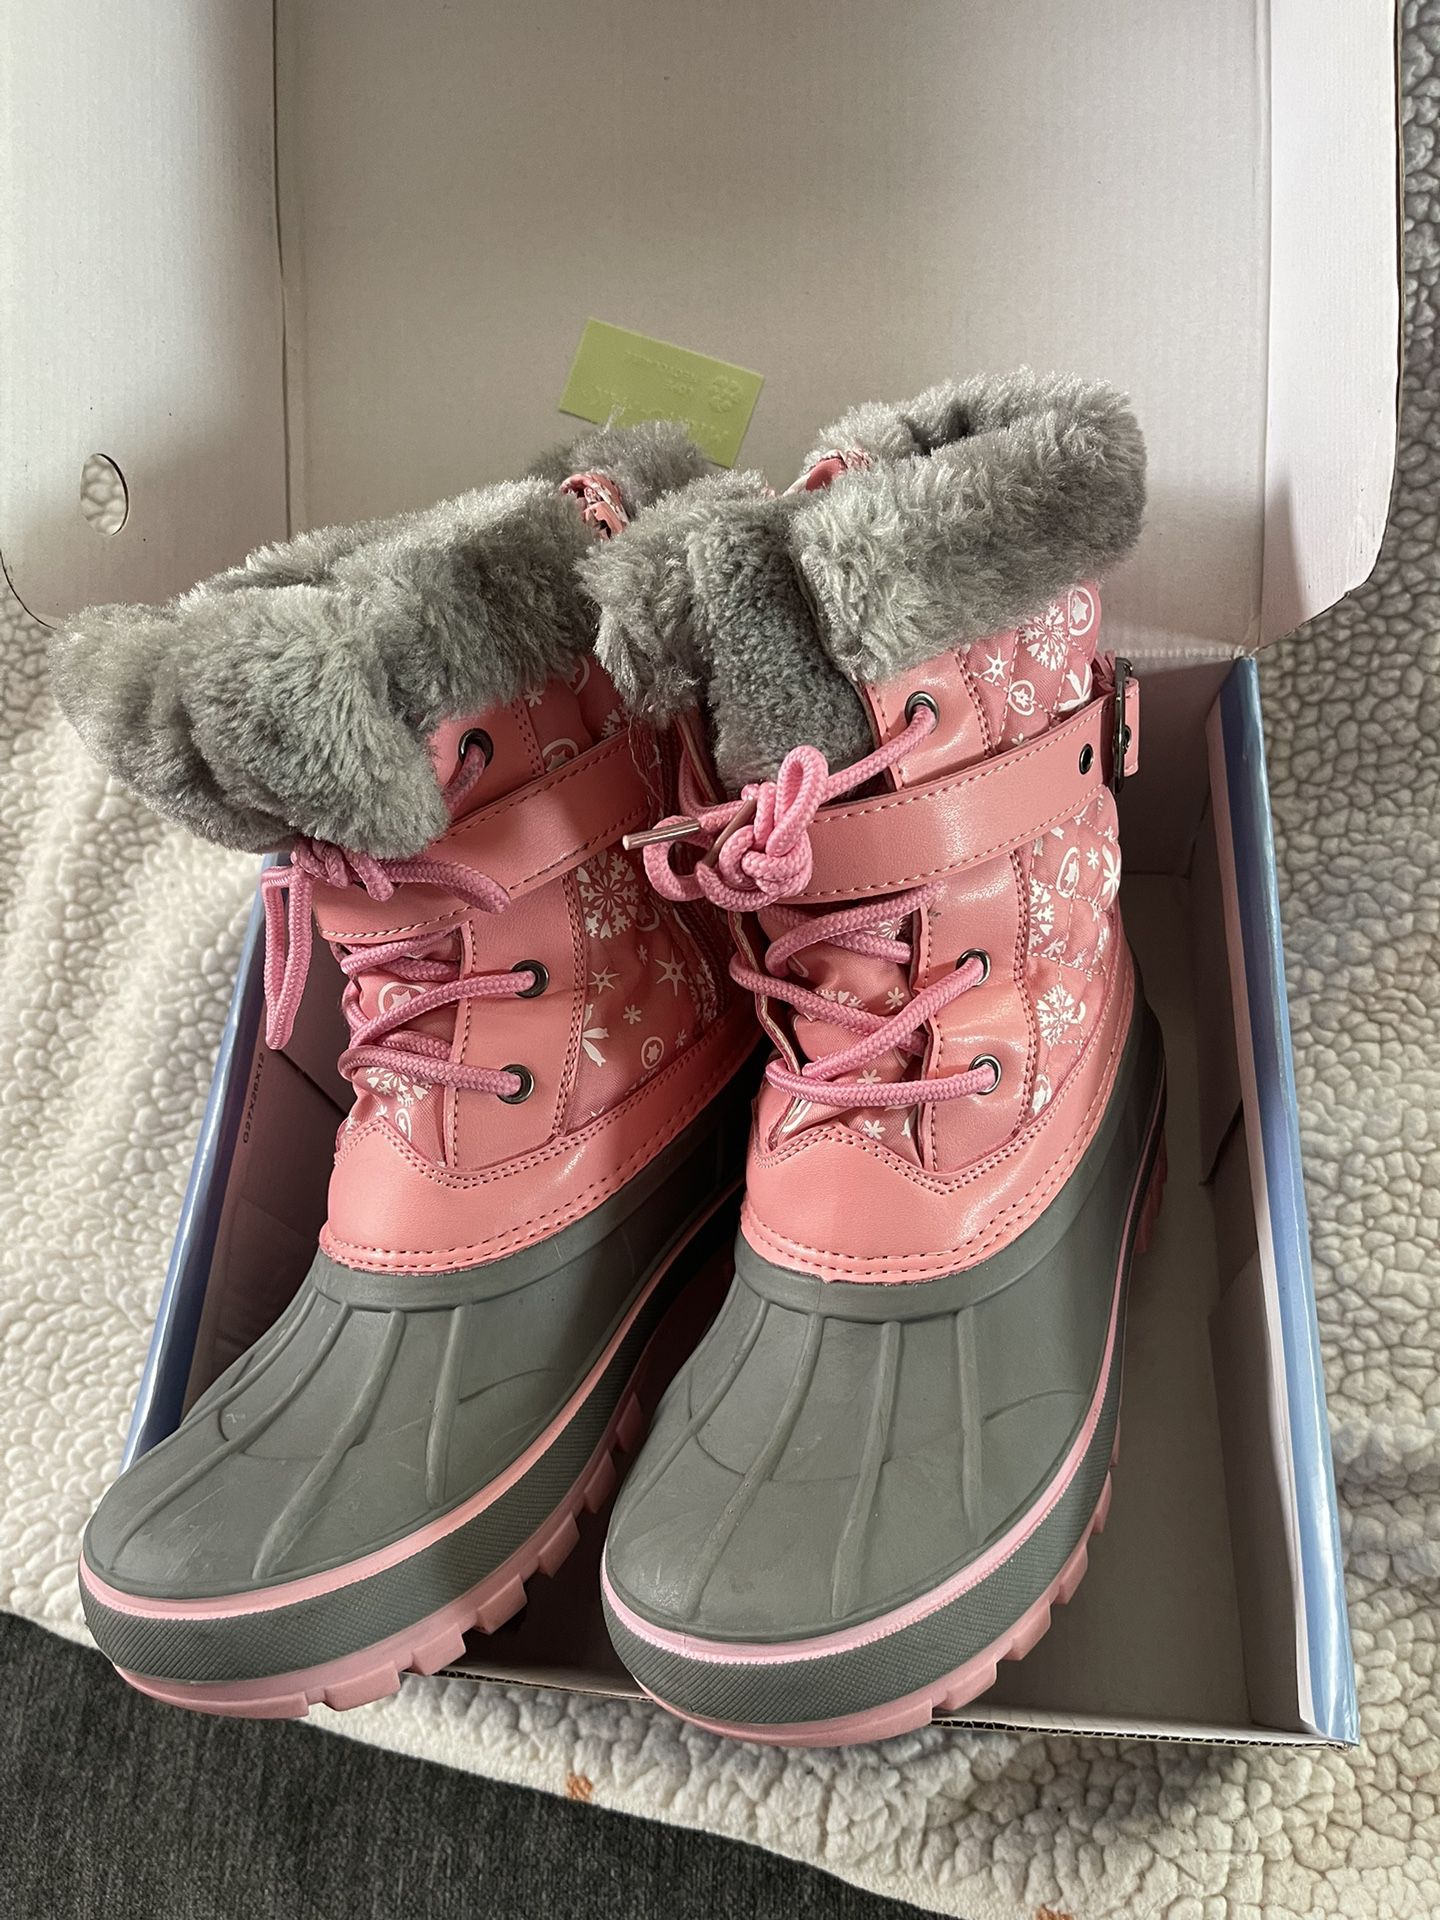 Snow Boots For Girls 